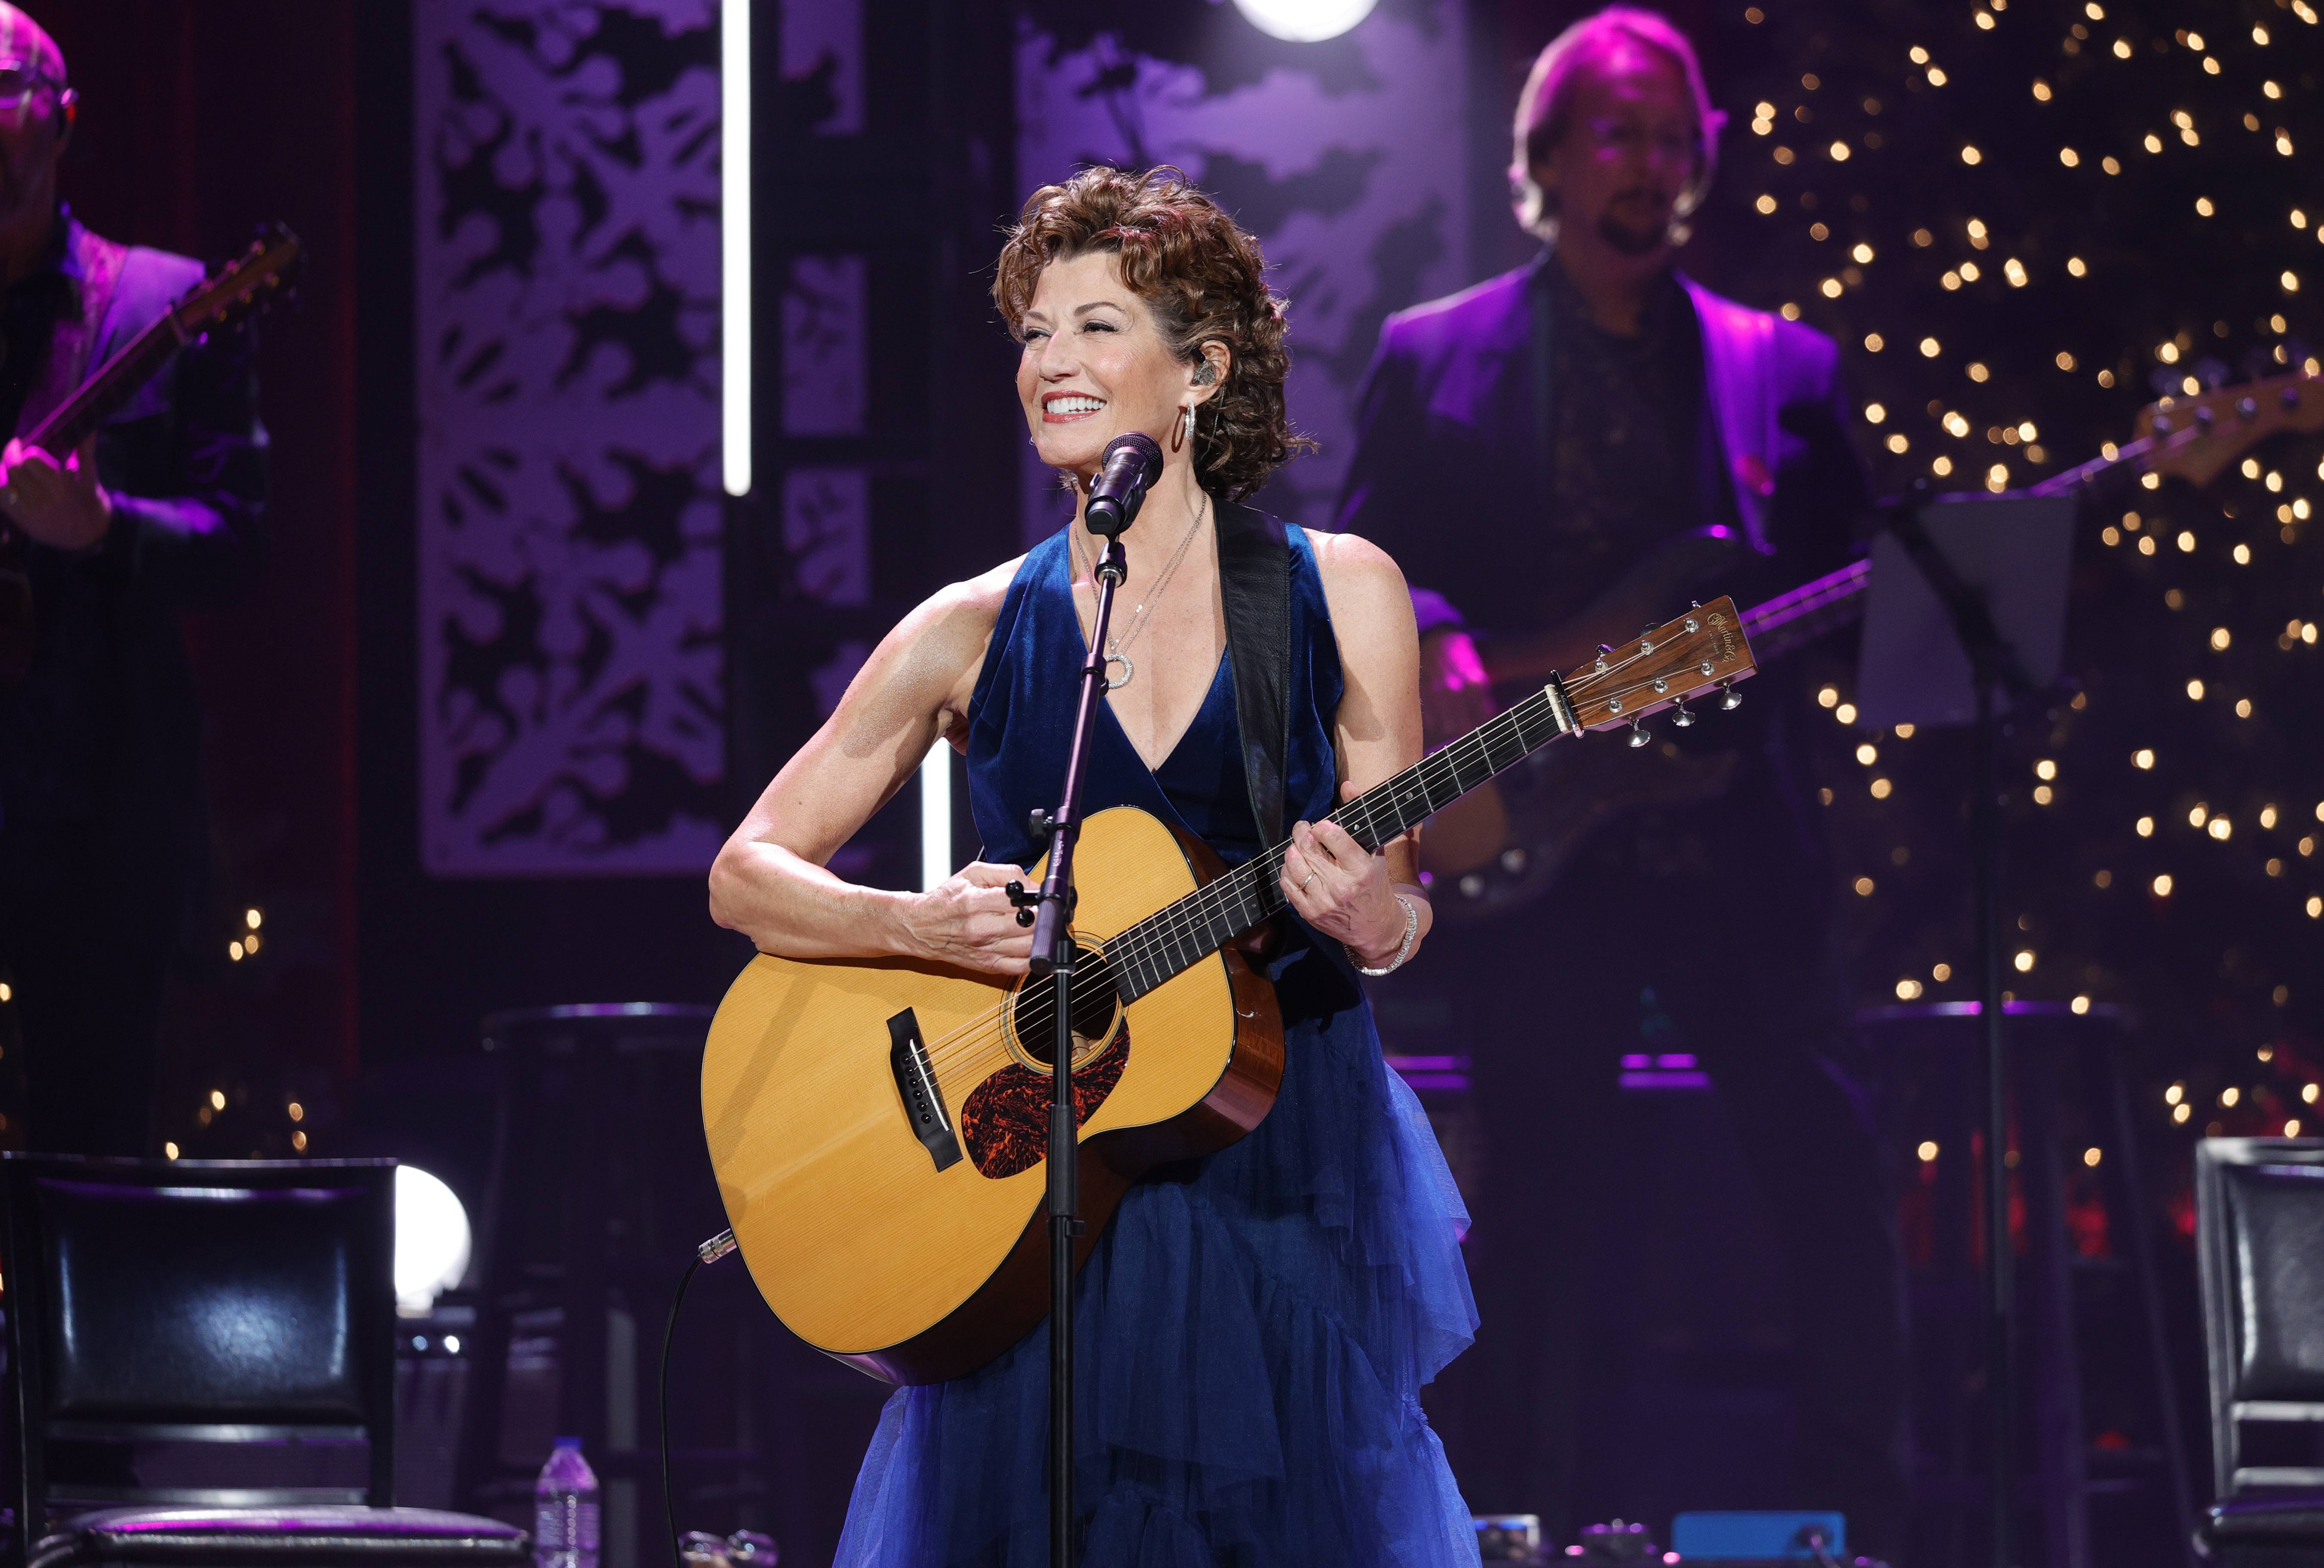 NASHVILLE, TENNESSEE - DECEMBER 13: Amy Grant performs at the Ryman Auditorium on December 13, 2021 in Nashville, Tennessee. 